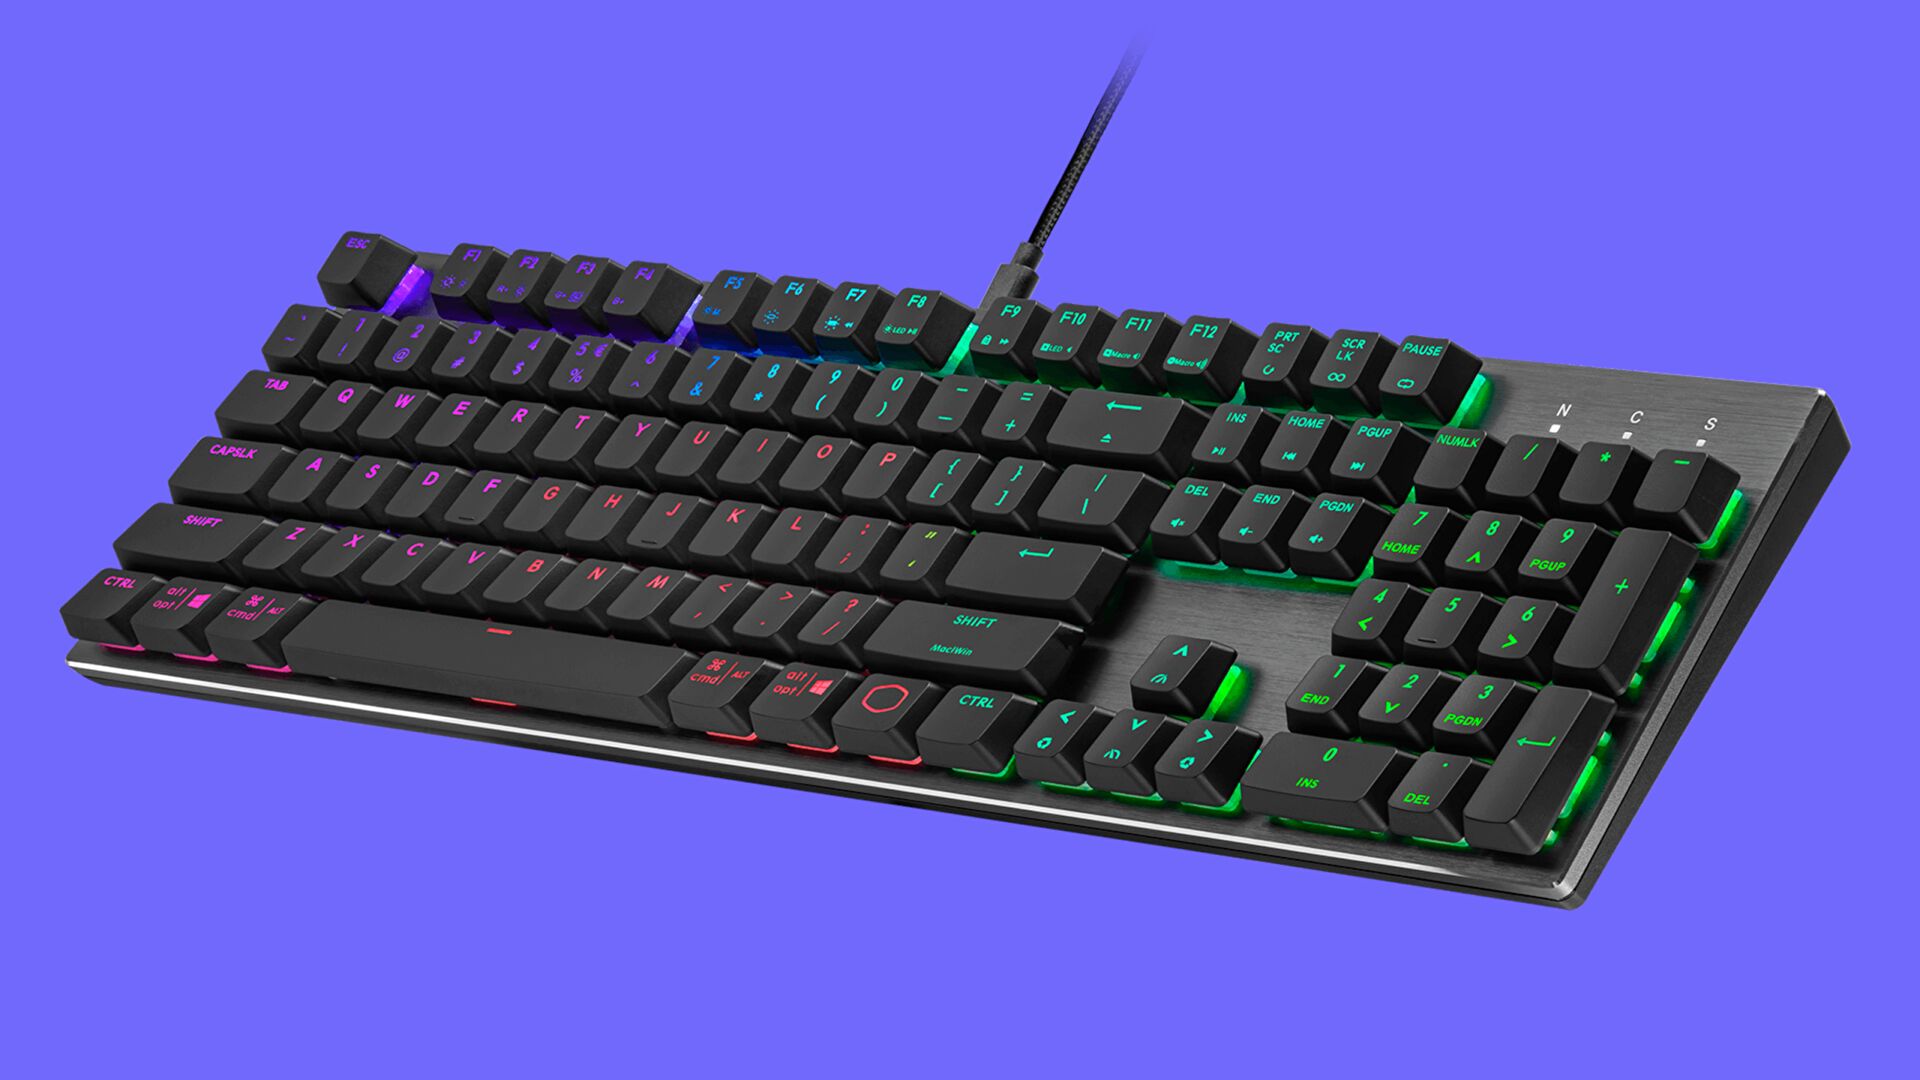 Get a full-size, fully mechanical gaming keyboard for £45 with this early Black Friday deal